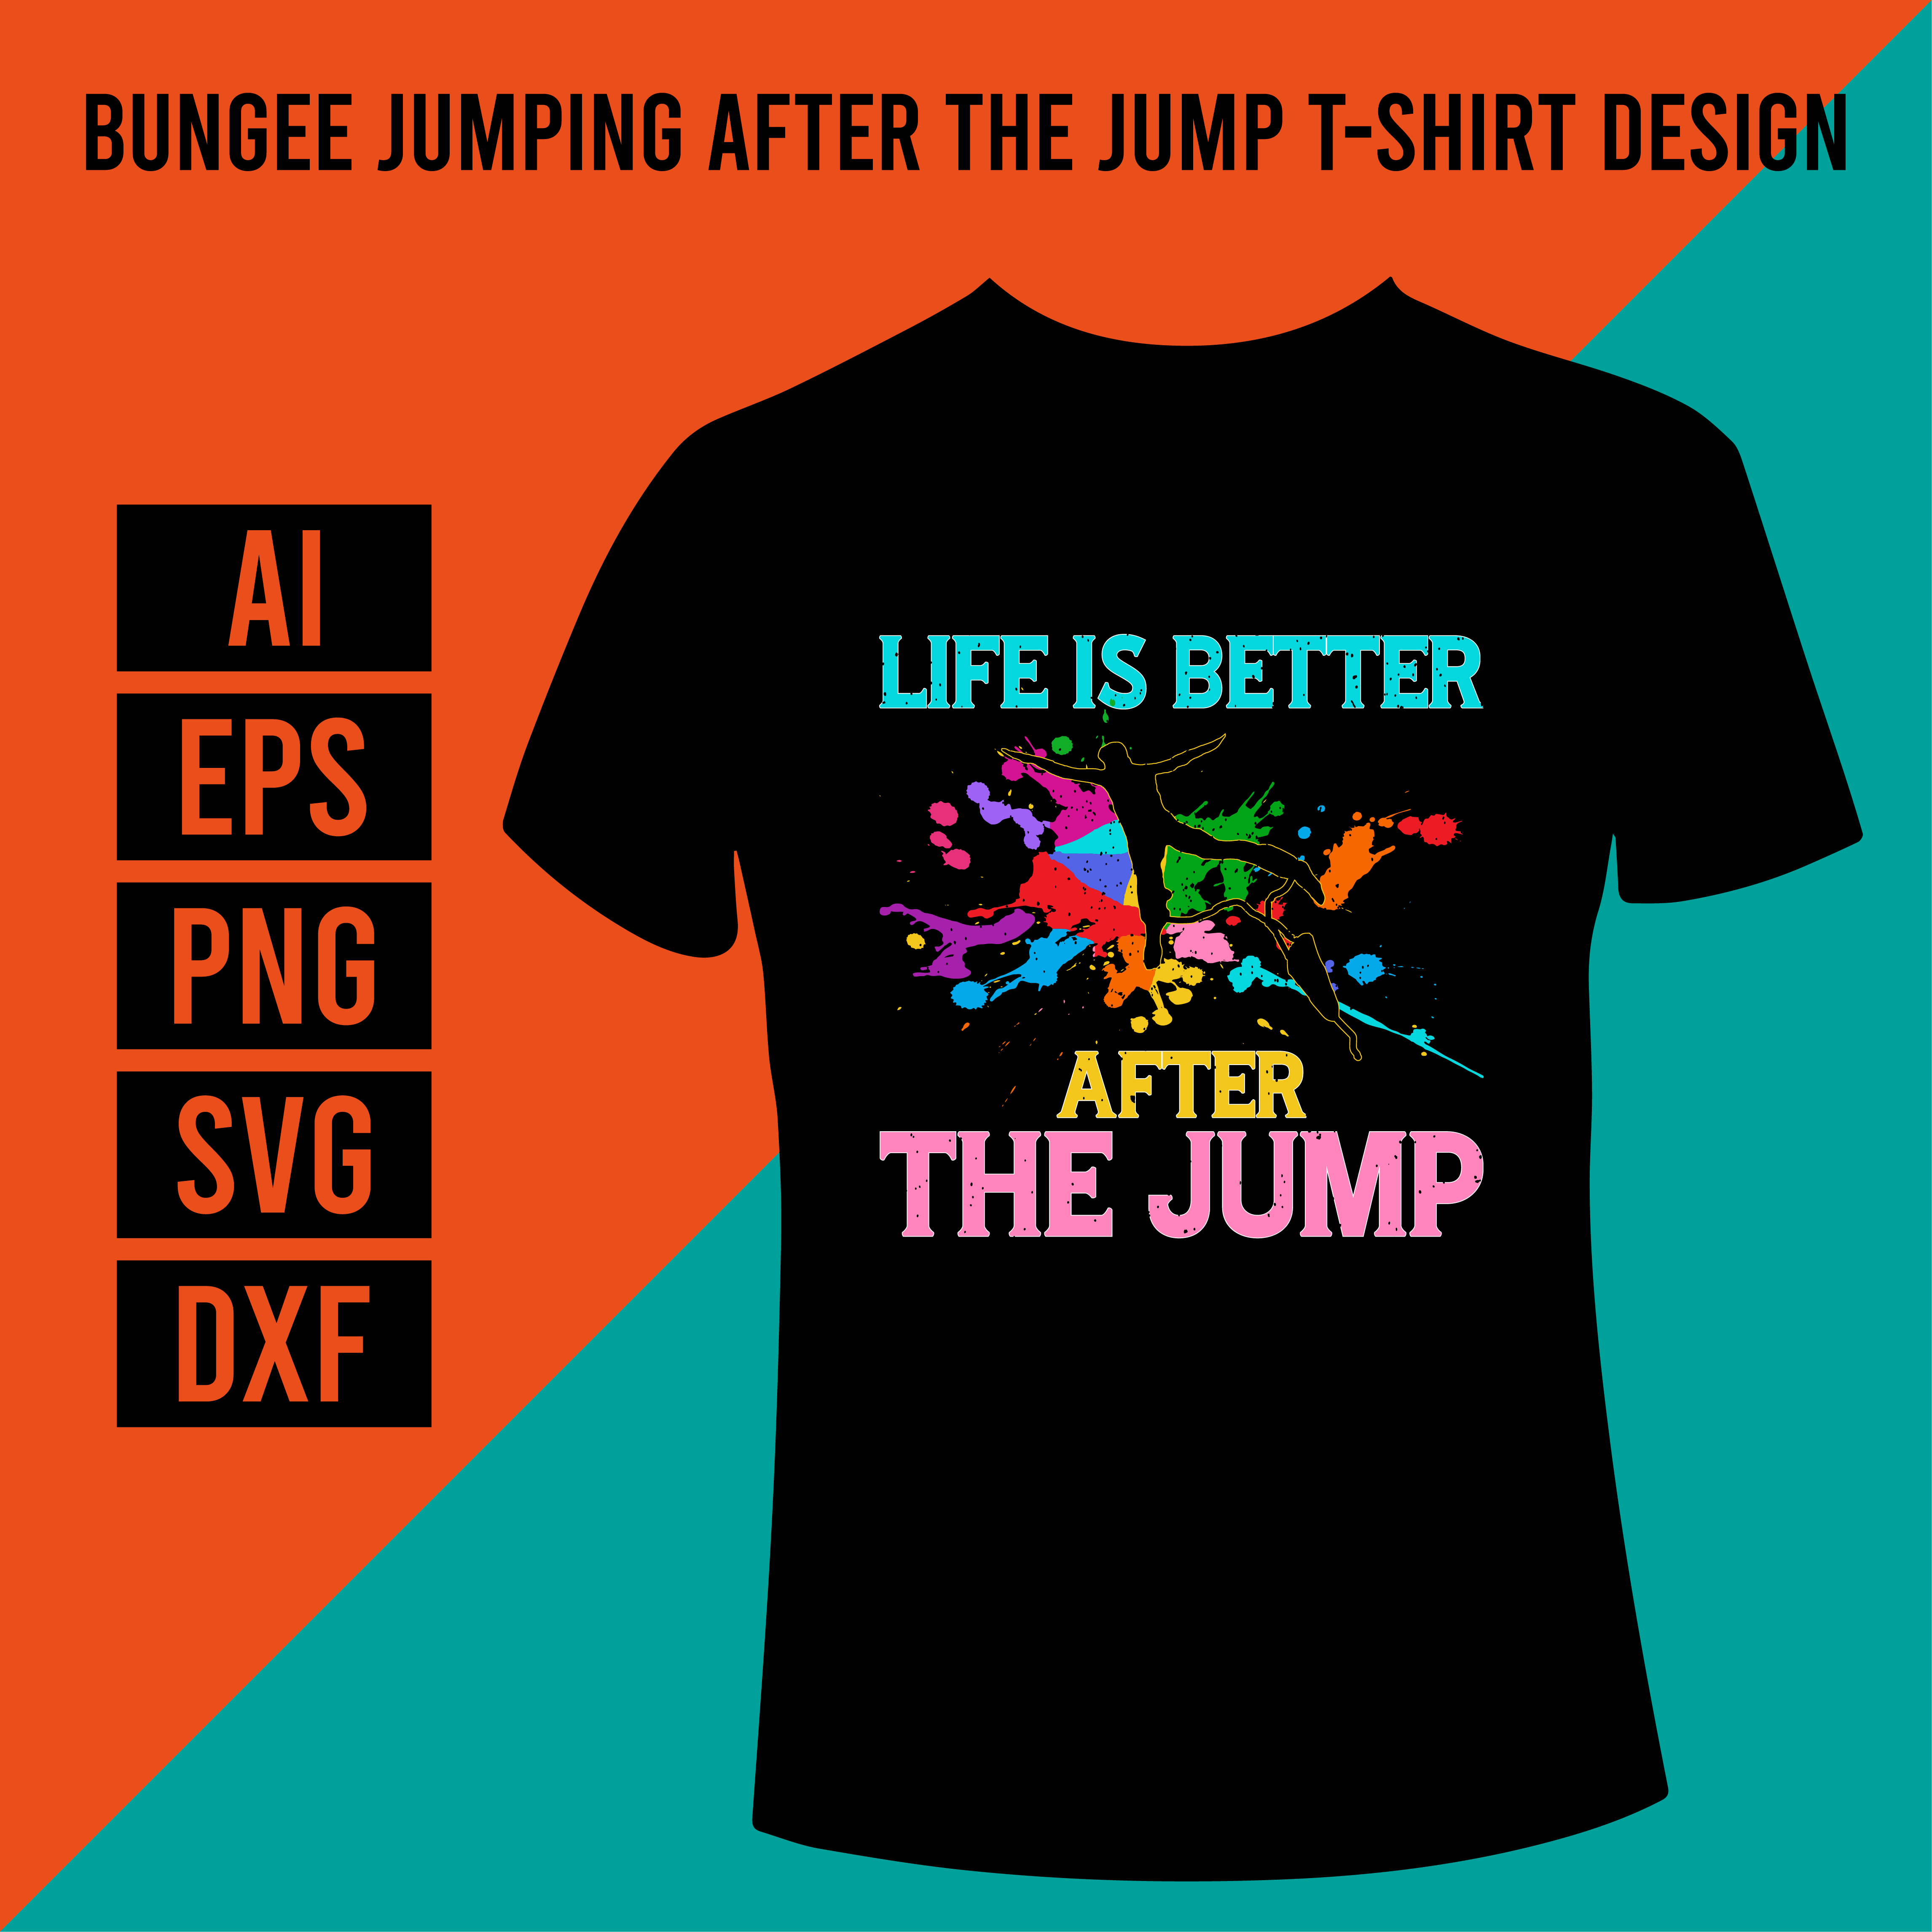 Bungee Jumping After The Jump T-Shirt Design cover image.